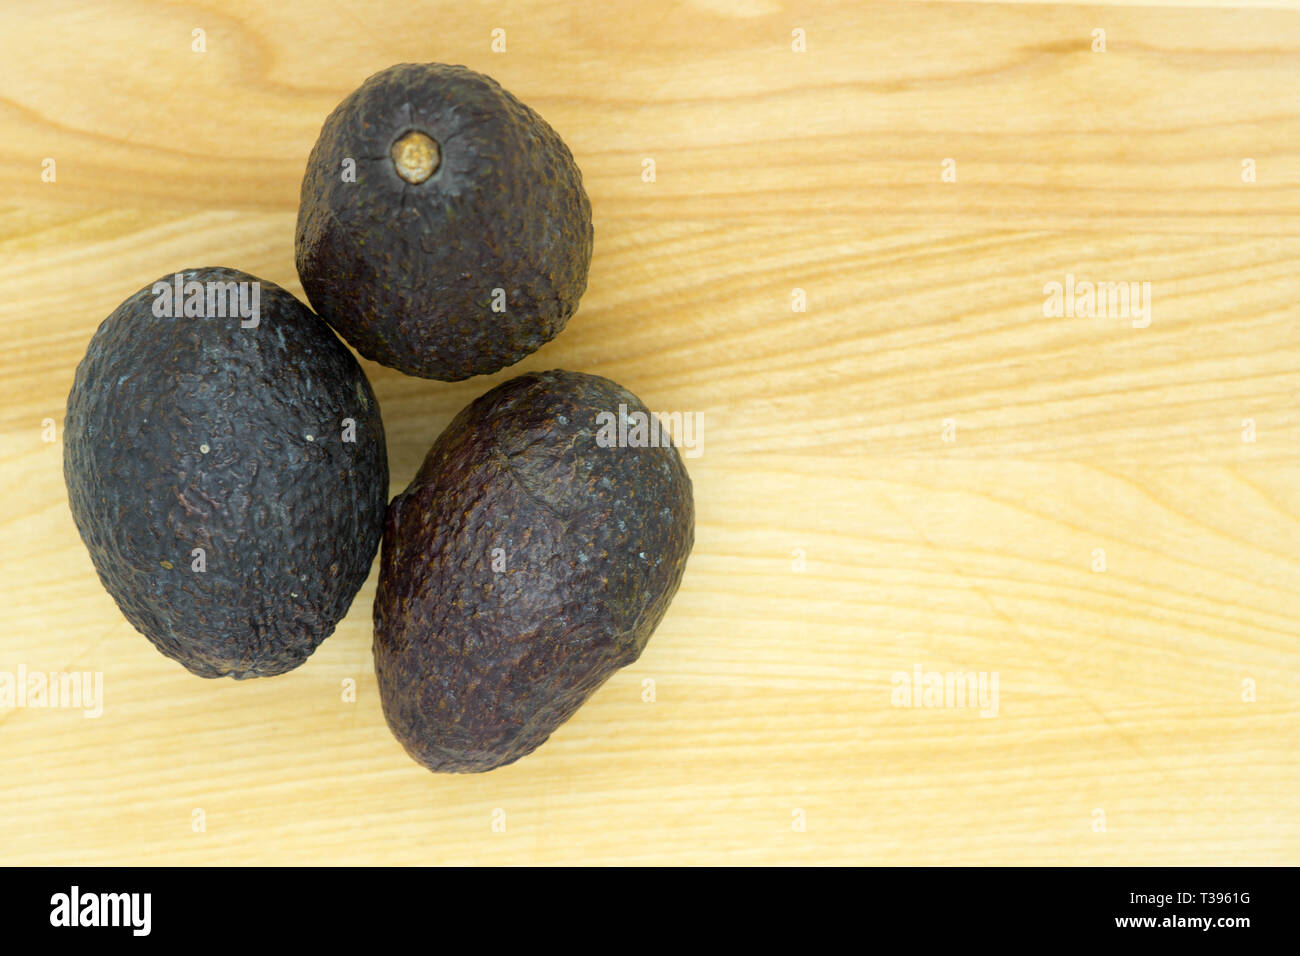 three riper avocados on a light brown table Stock Photo